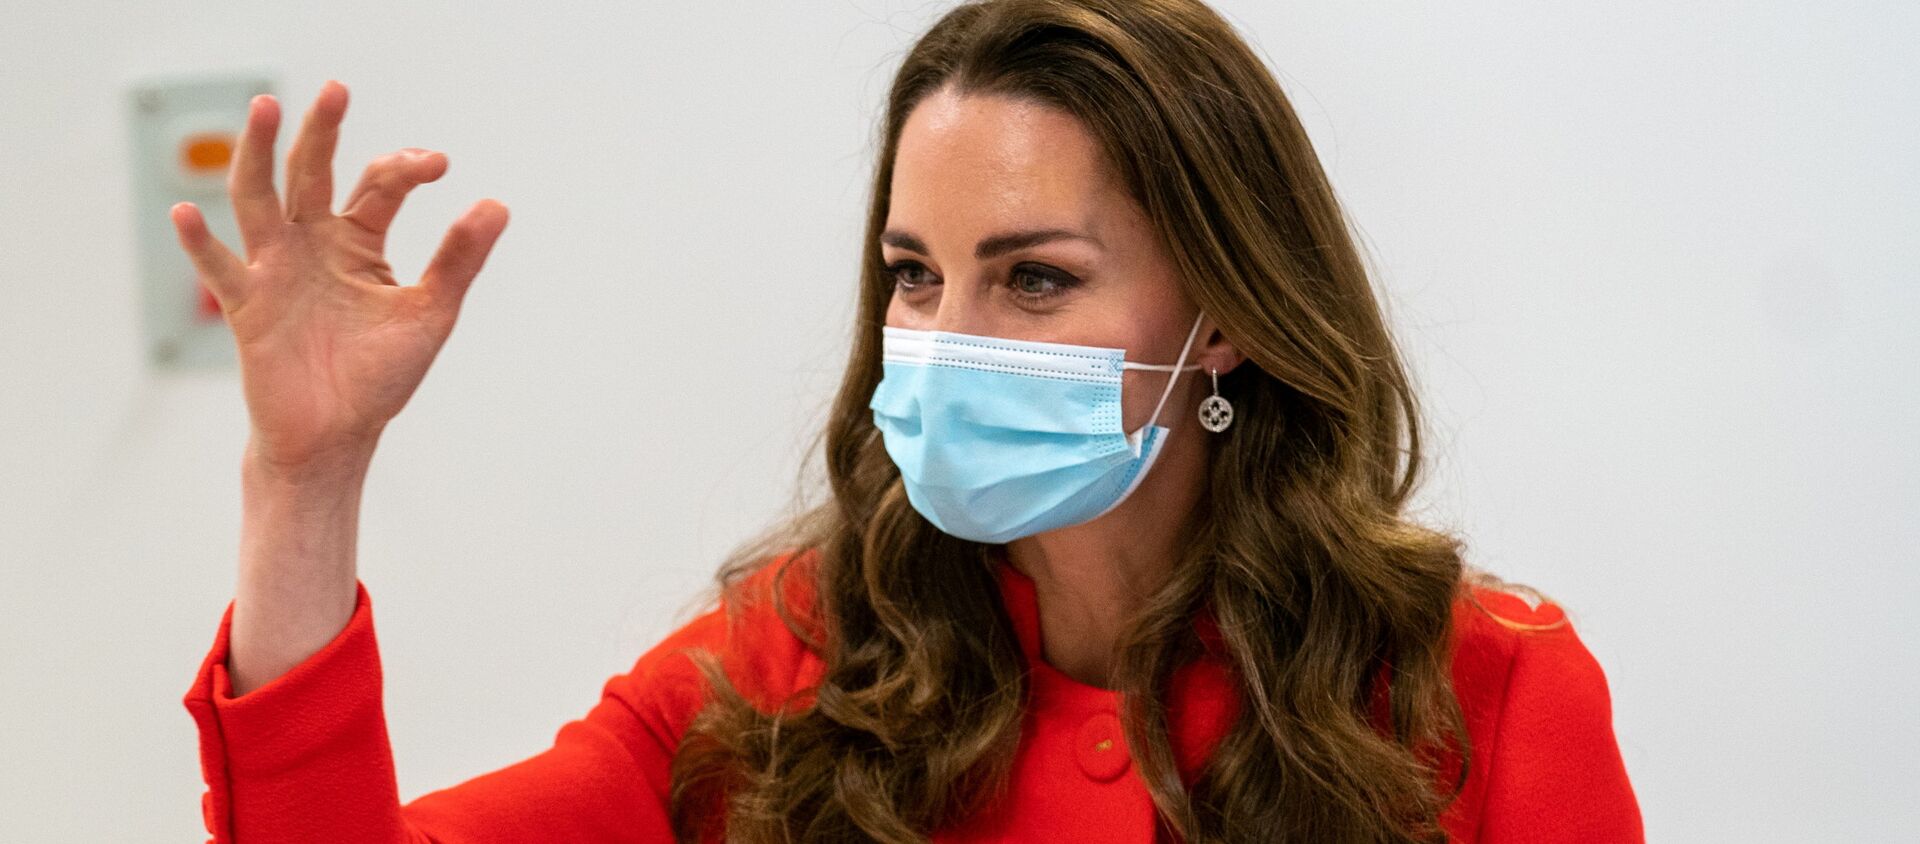 Britain's Catherine, Duchess of Cambridge, gestures during her visit to Royal London Hospital, Whitechapel in Britain May 7, 2021 where she heard about how the hospital uses art to benefit its staff and patients.  - Sputnik International, 1920, 05.07.2021